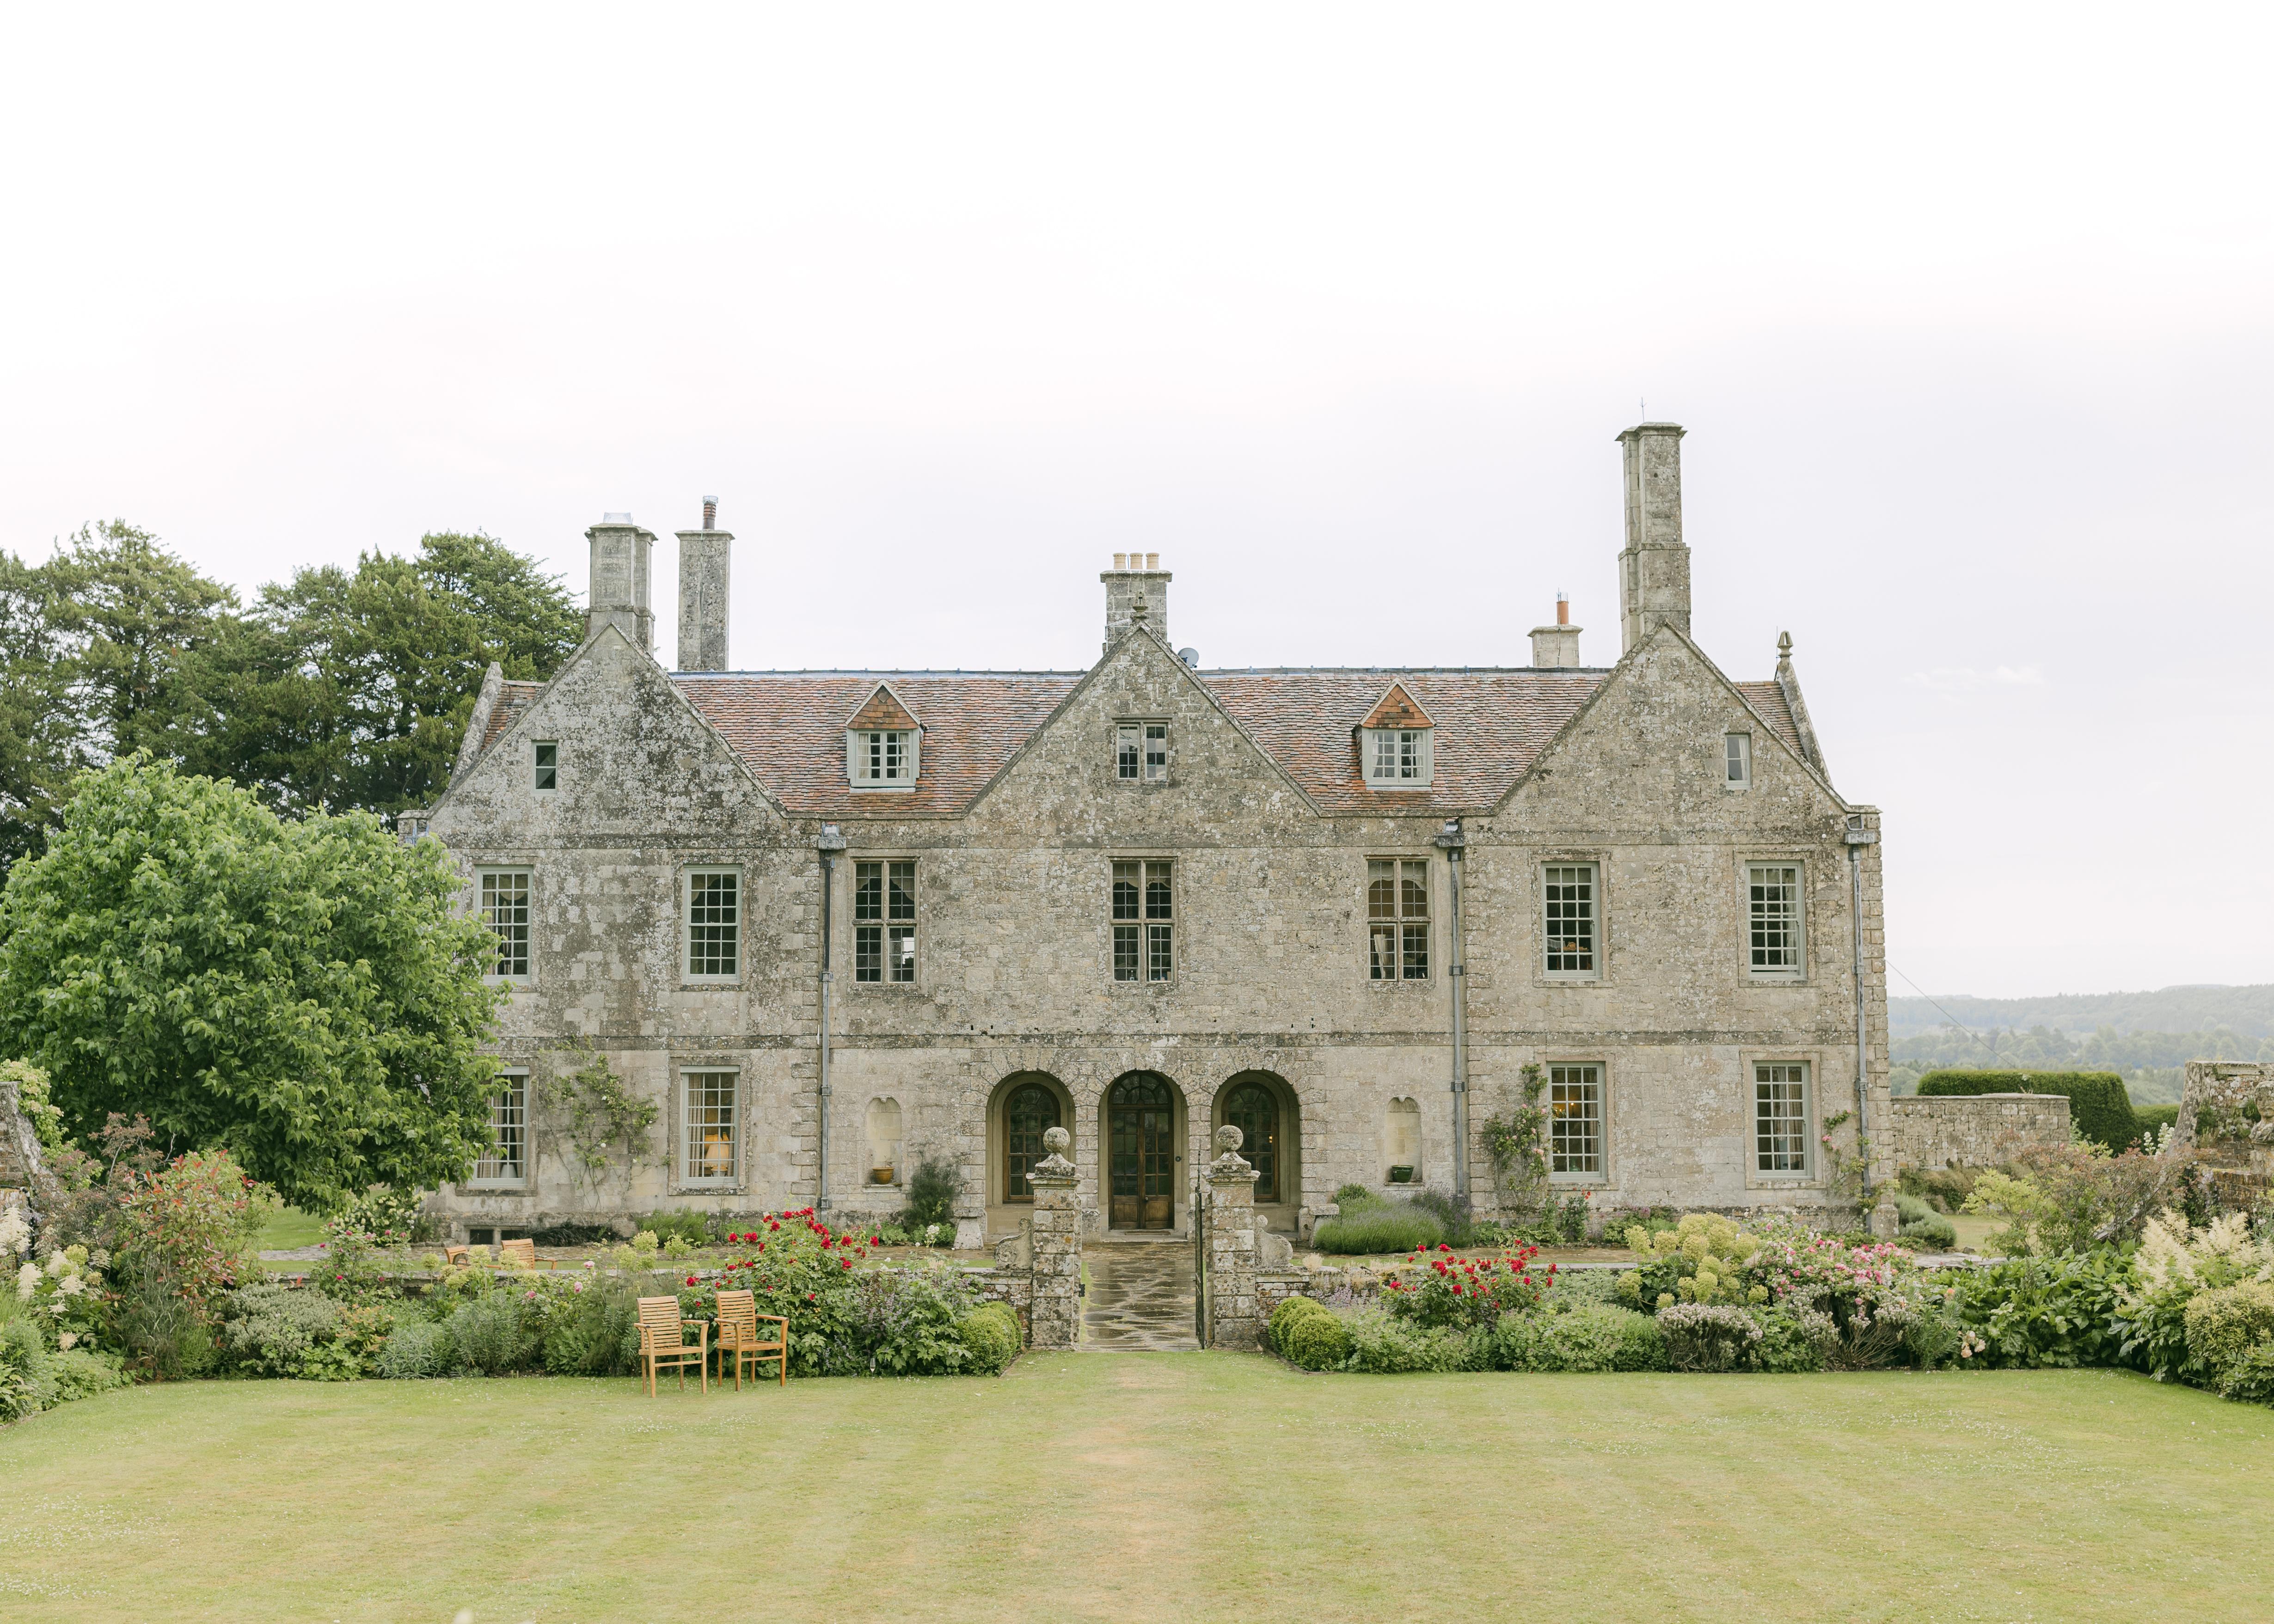 This English Countryside Wedding Is the Quintessential Dream for the Classic Bride-To-Be!